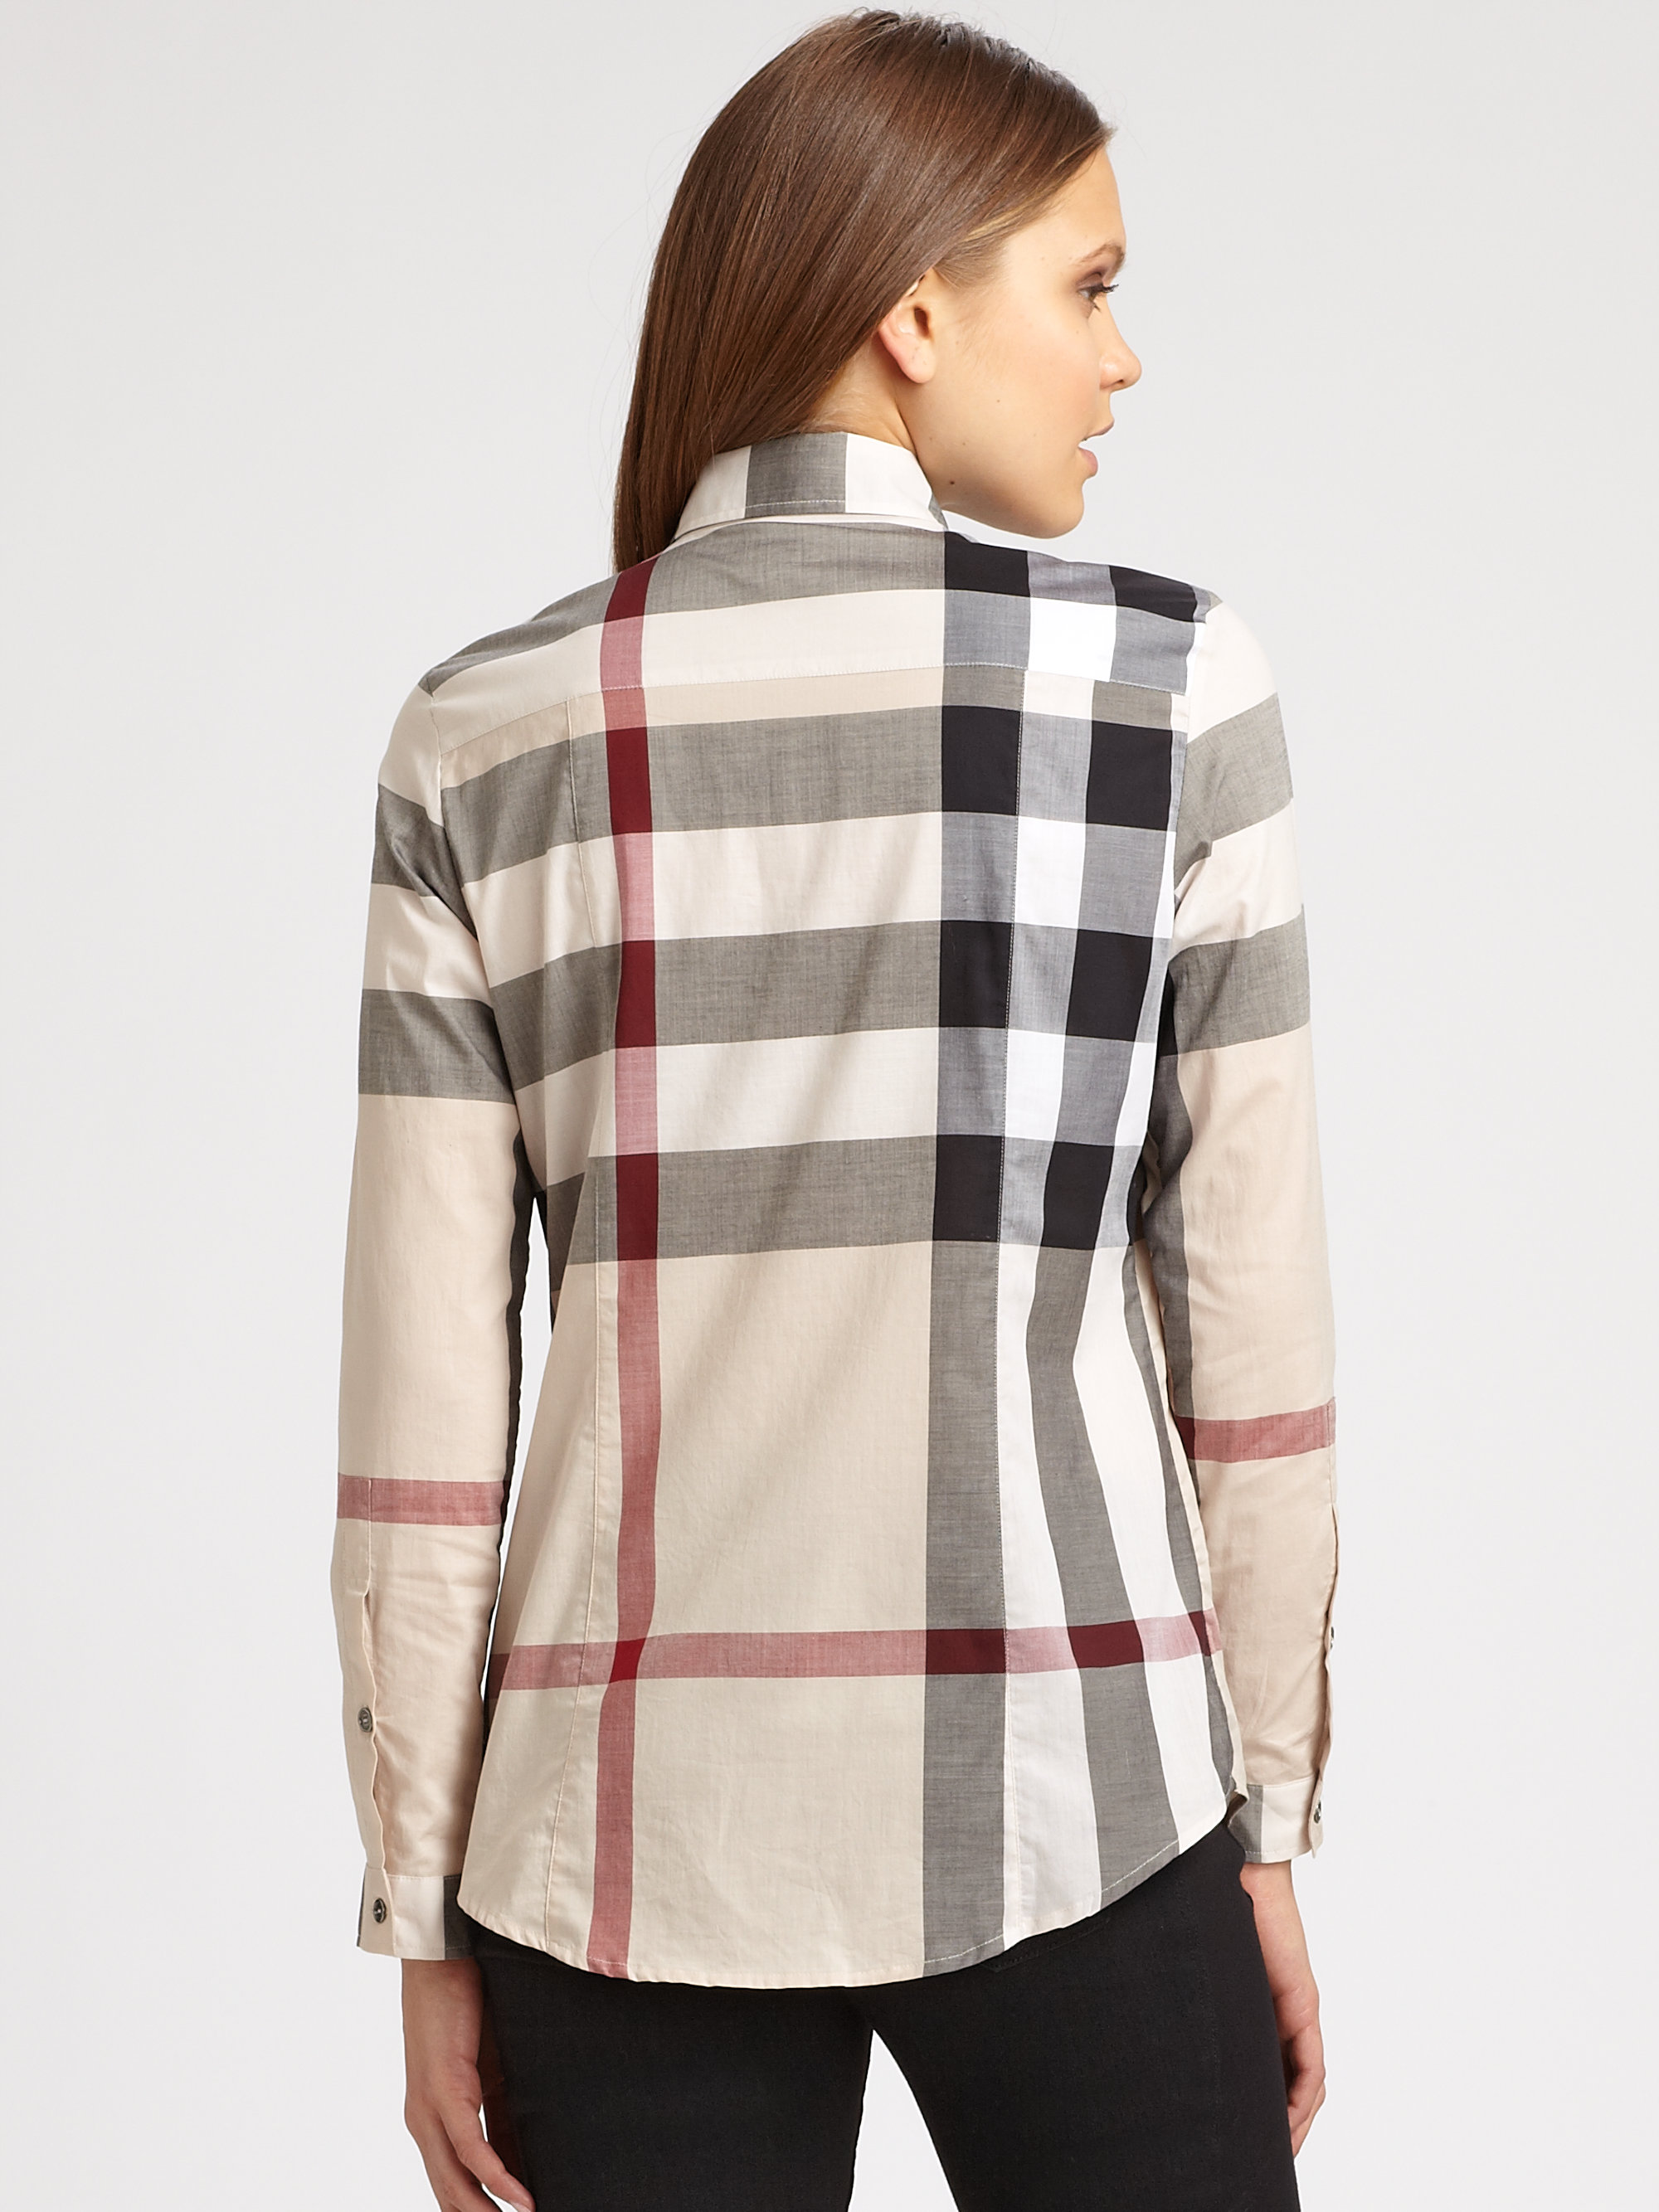 Integratie lood Oxide Burberry Brit Cotton Check Blouse in Natural | Lyst